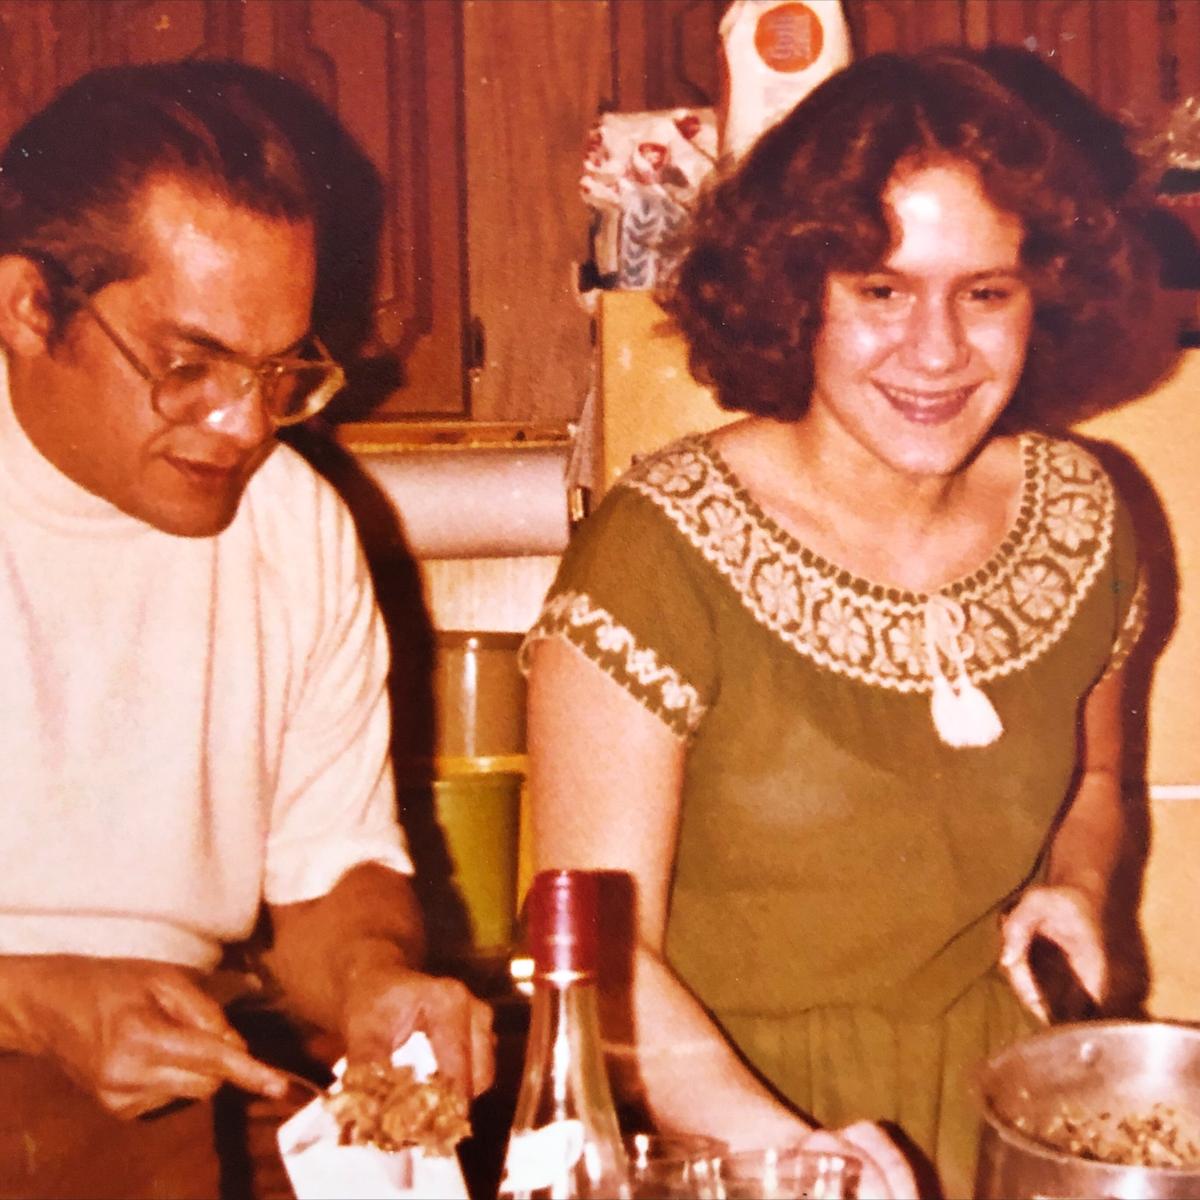 The author's father, Cesar Colon-Bonet, and sister, Denise Colon-Bonet, preparing the family feast together in the spring of 1979. (Courtesy of Cara Colon-McLauchlan)